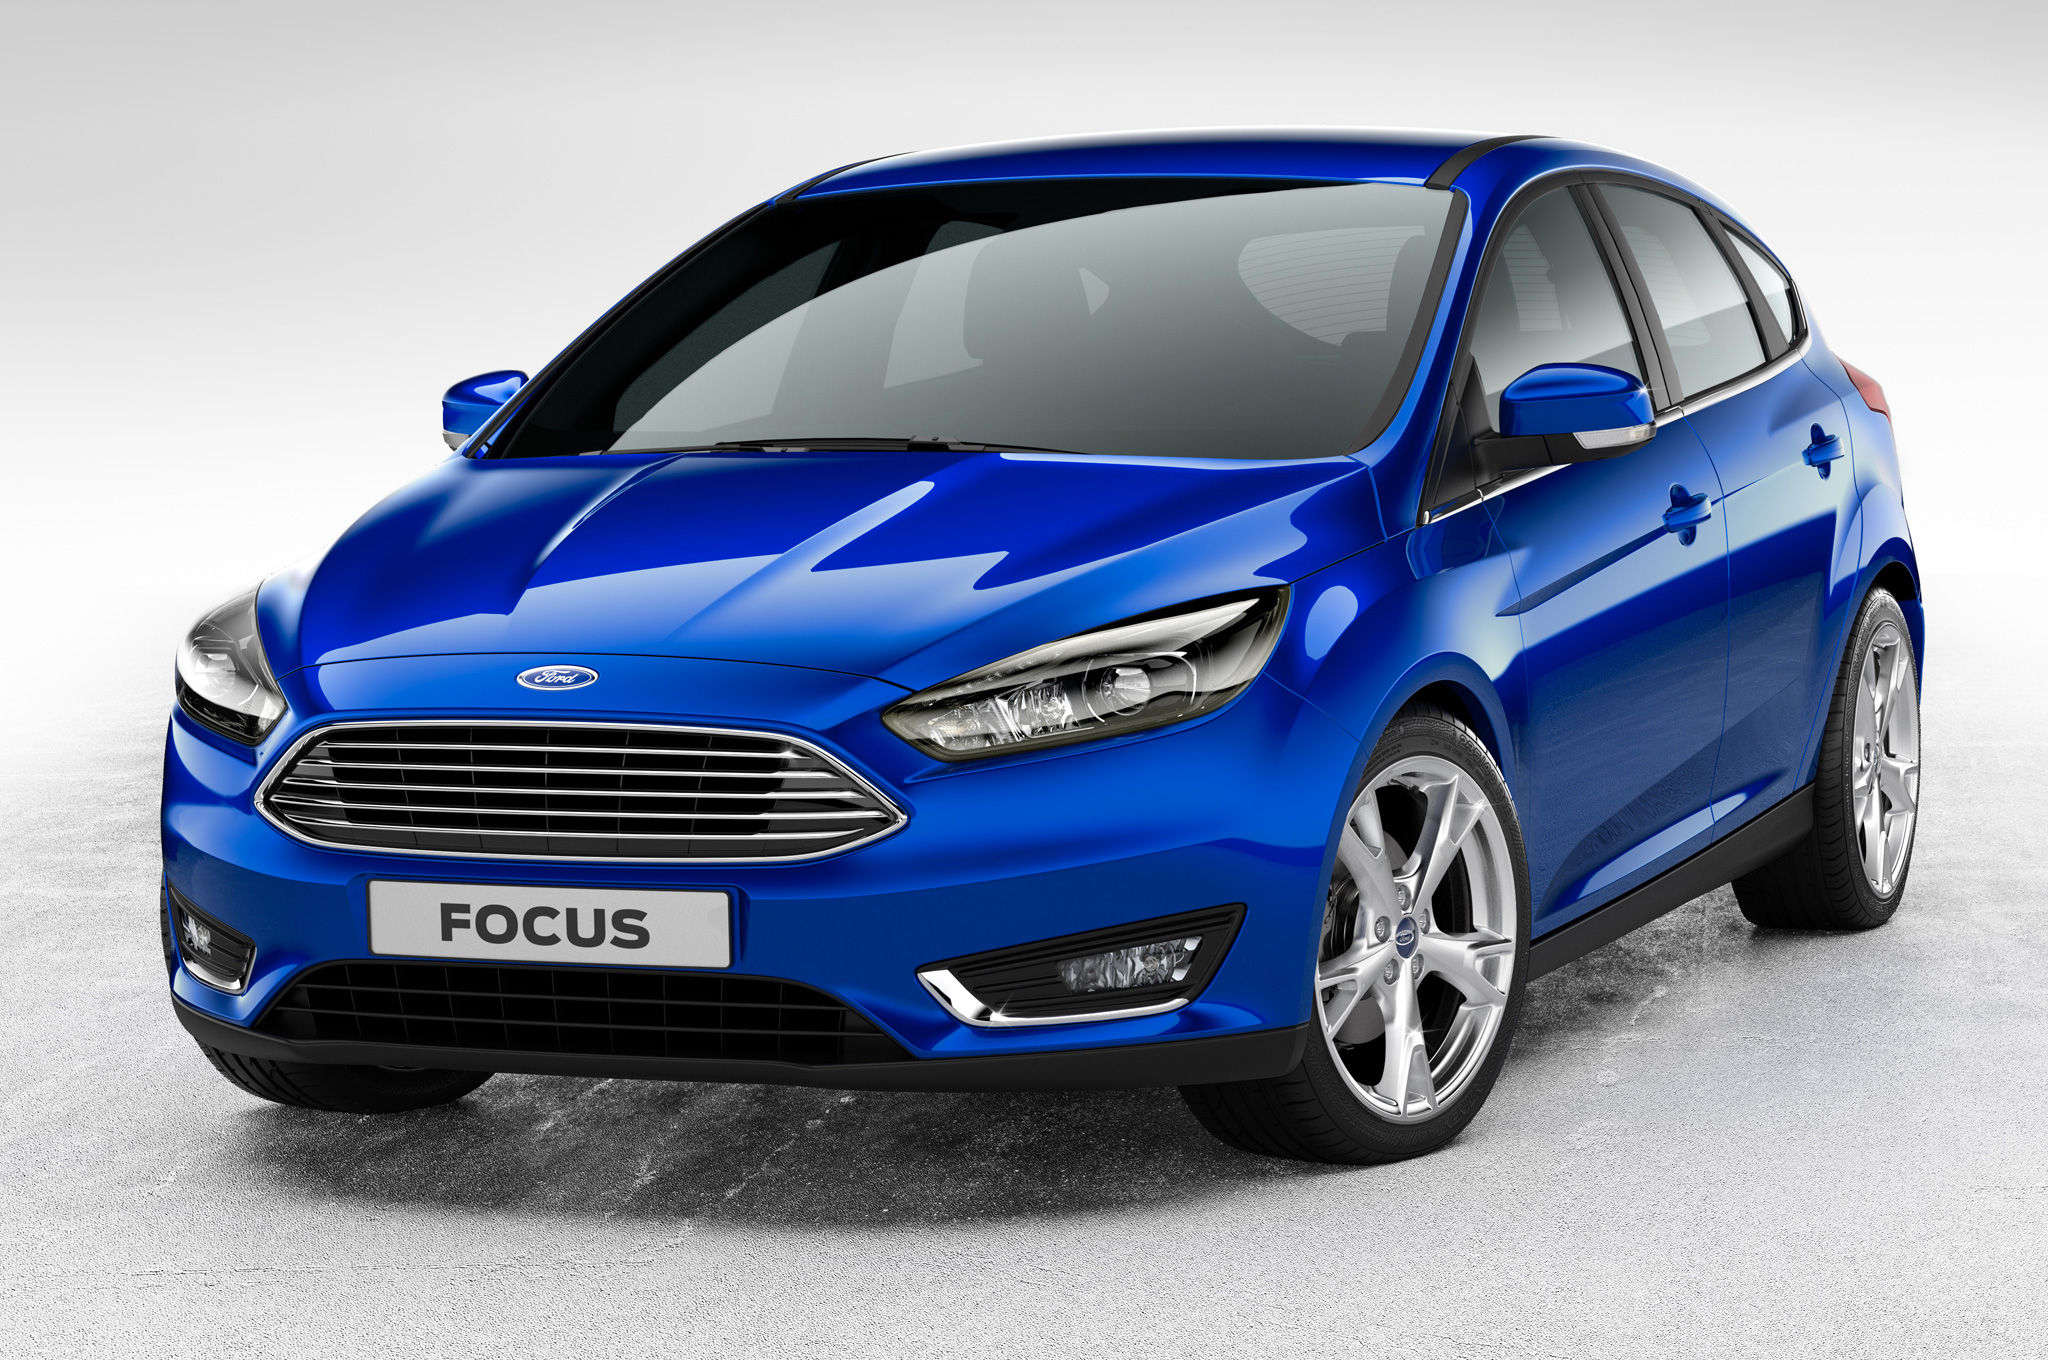 Ford Heritage deals: RM 10,000 off Focus, RM 8000 off EcoSport, Fiesta